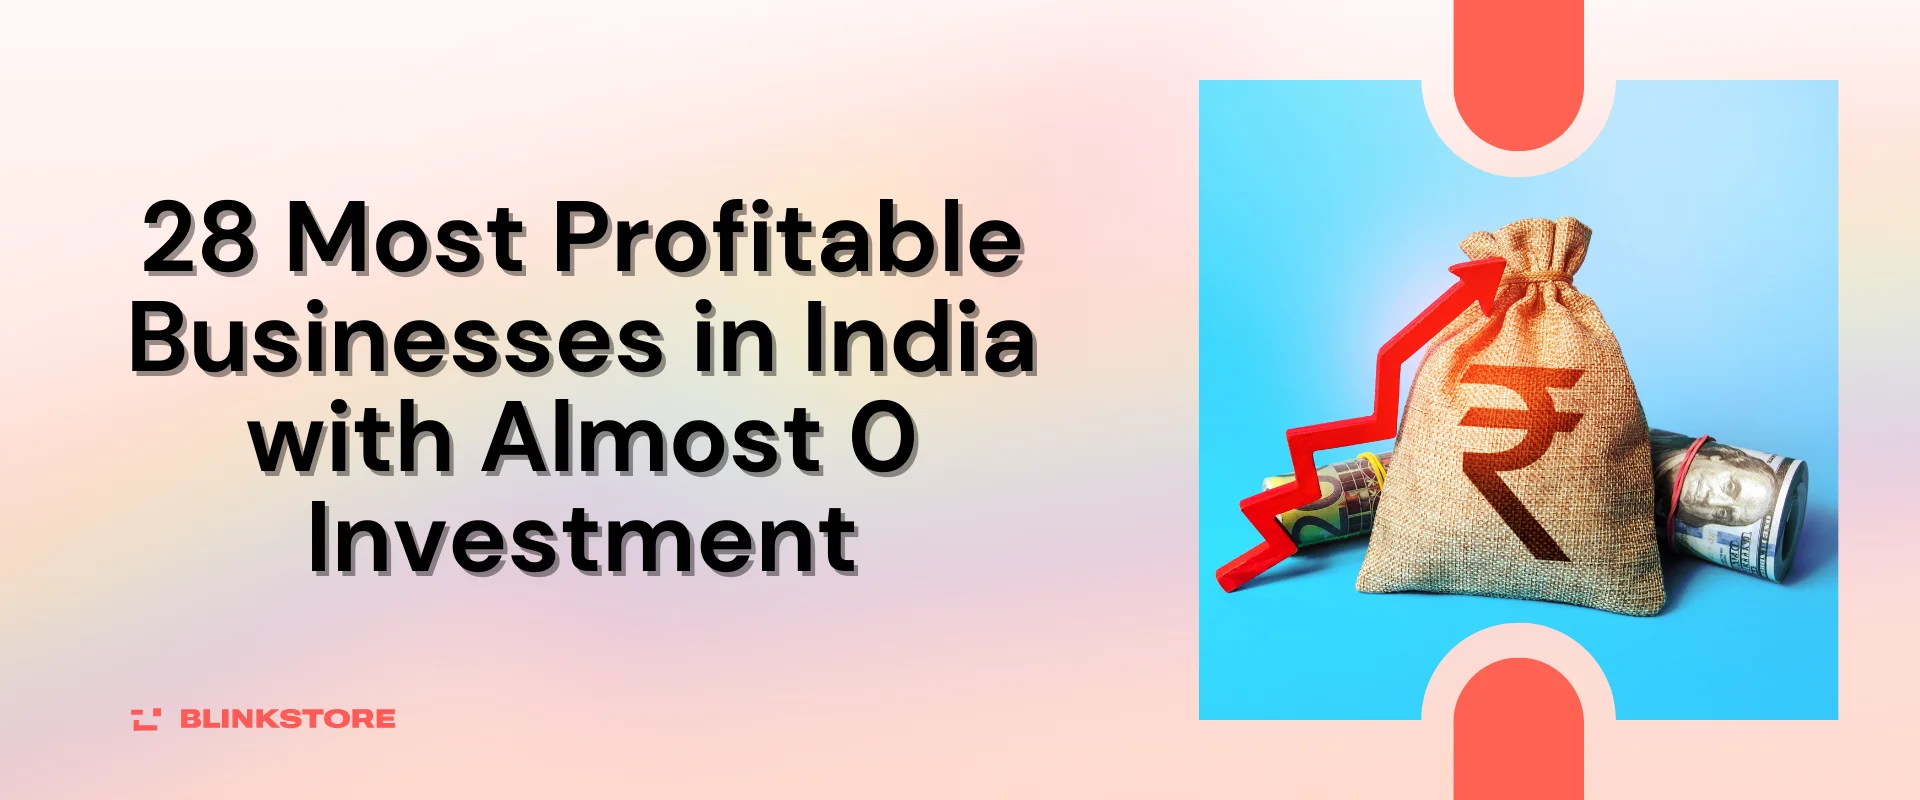 28 Most Profitable Business in India with Almost 0 Investment